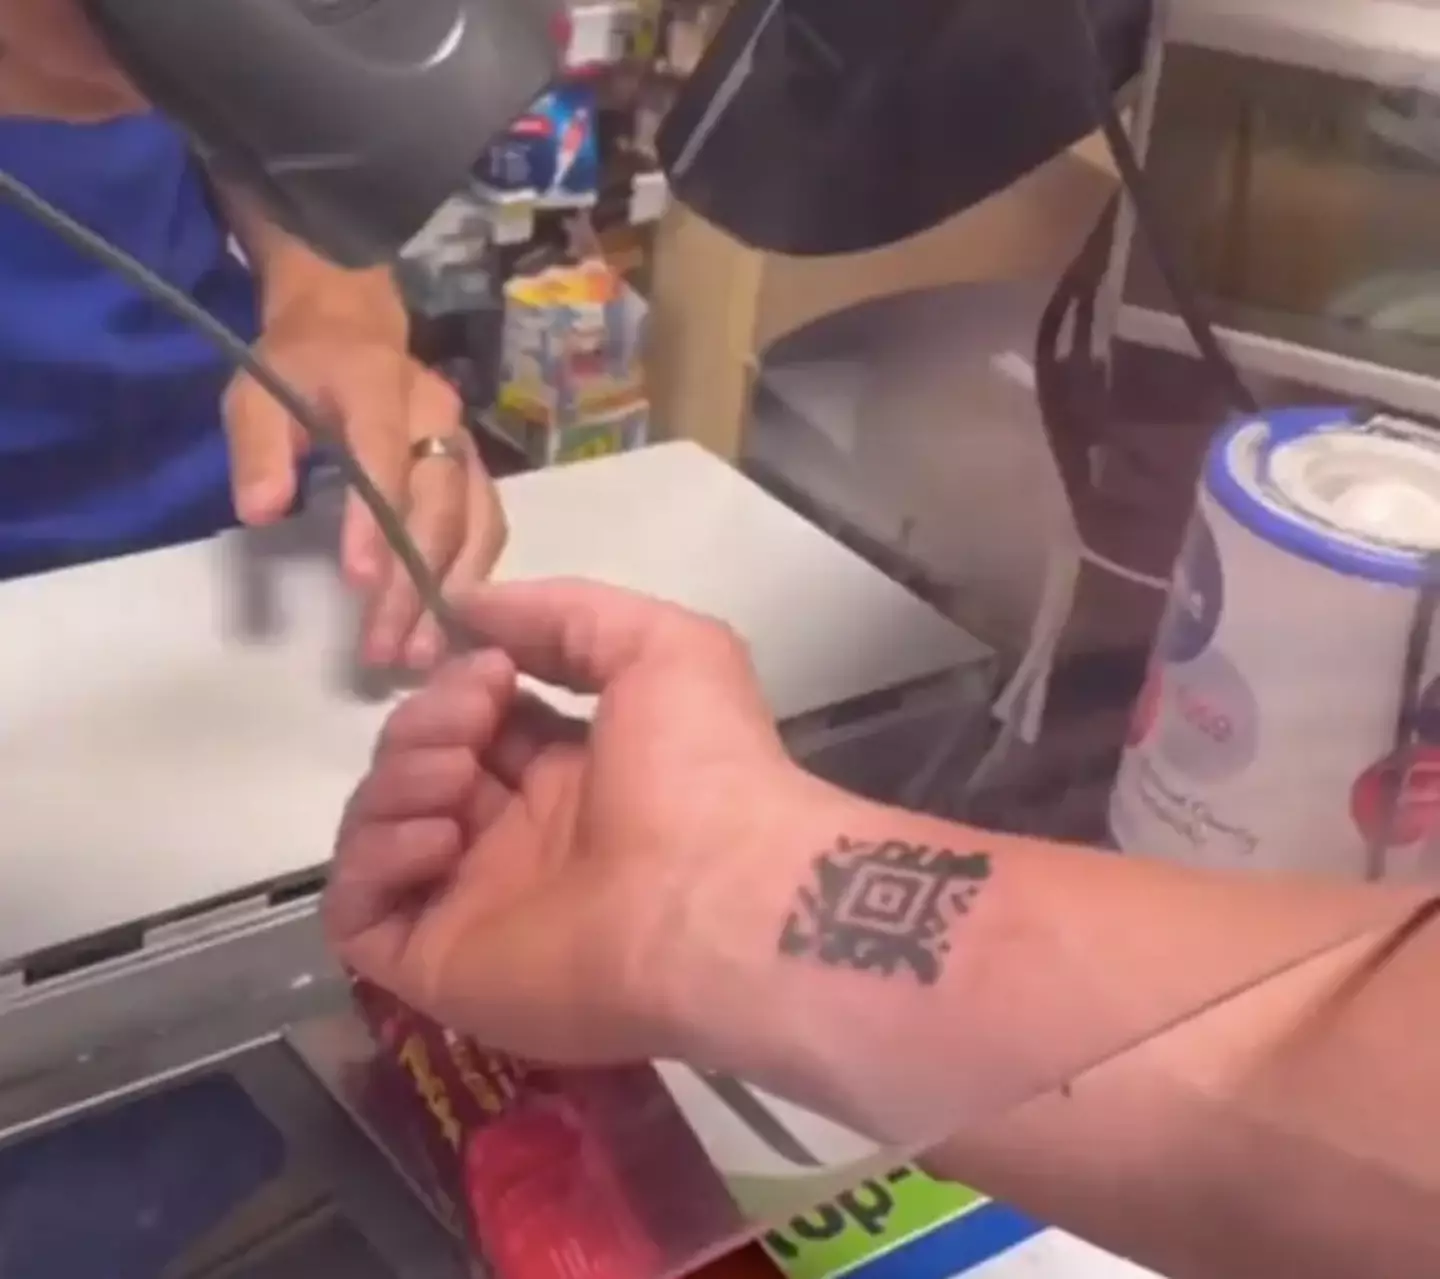 One lad got his Tesco Clubcard tattooed on his arm.